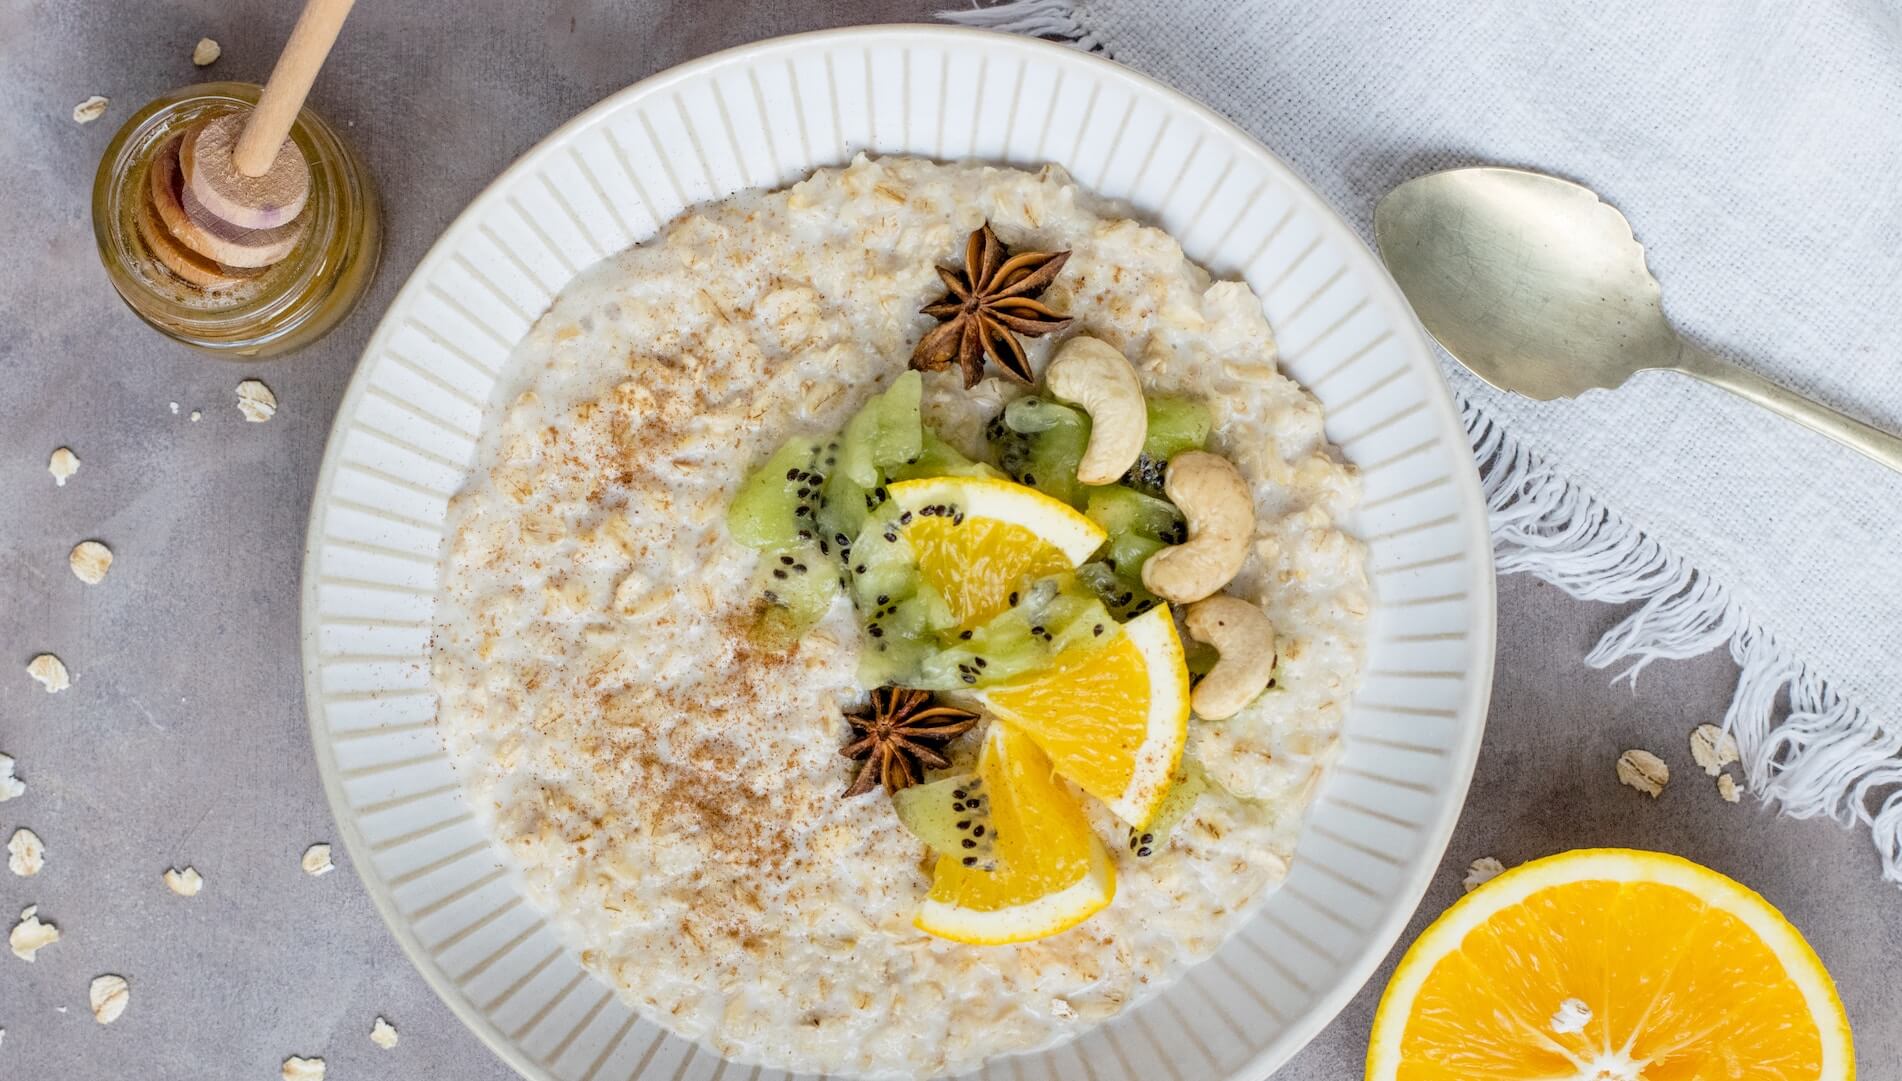 Are oats gluten free? A bowl of oats topped with citrus slices, kiwi, cashews and star anise with honey on the side.